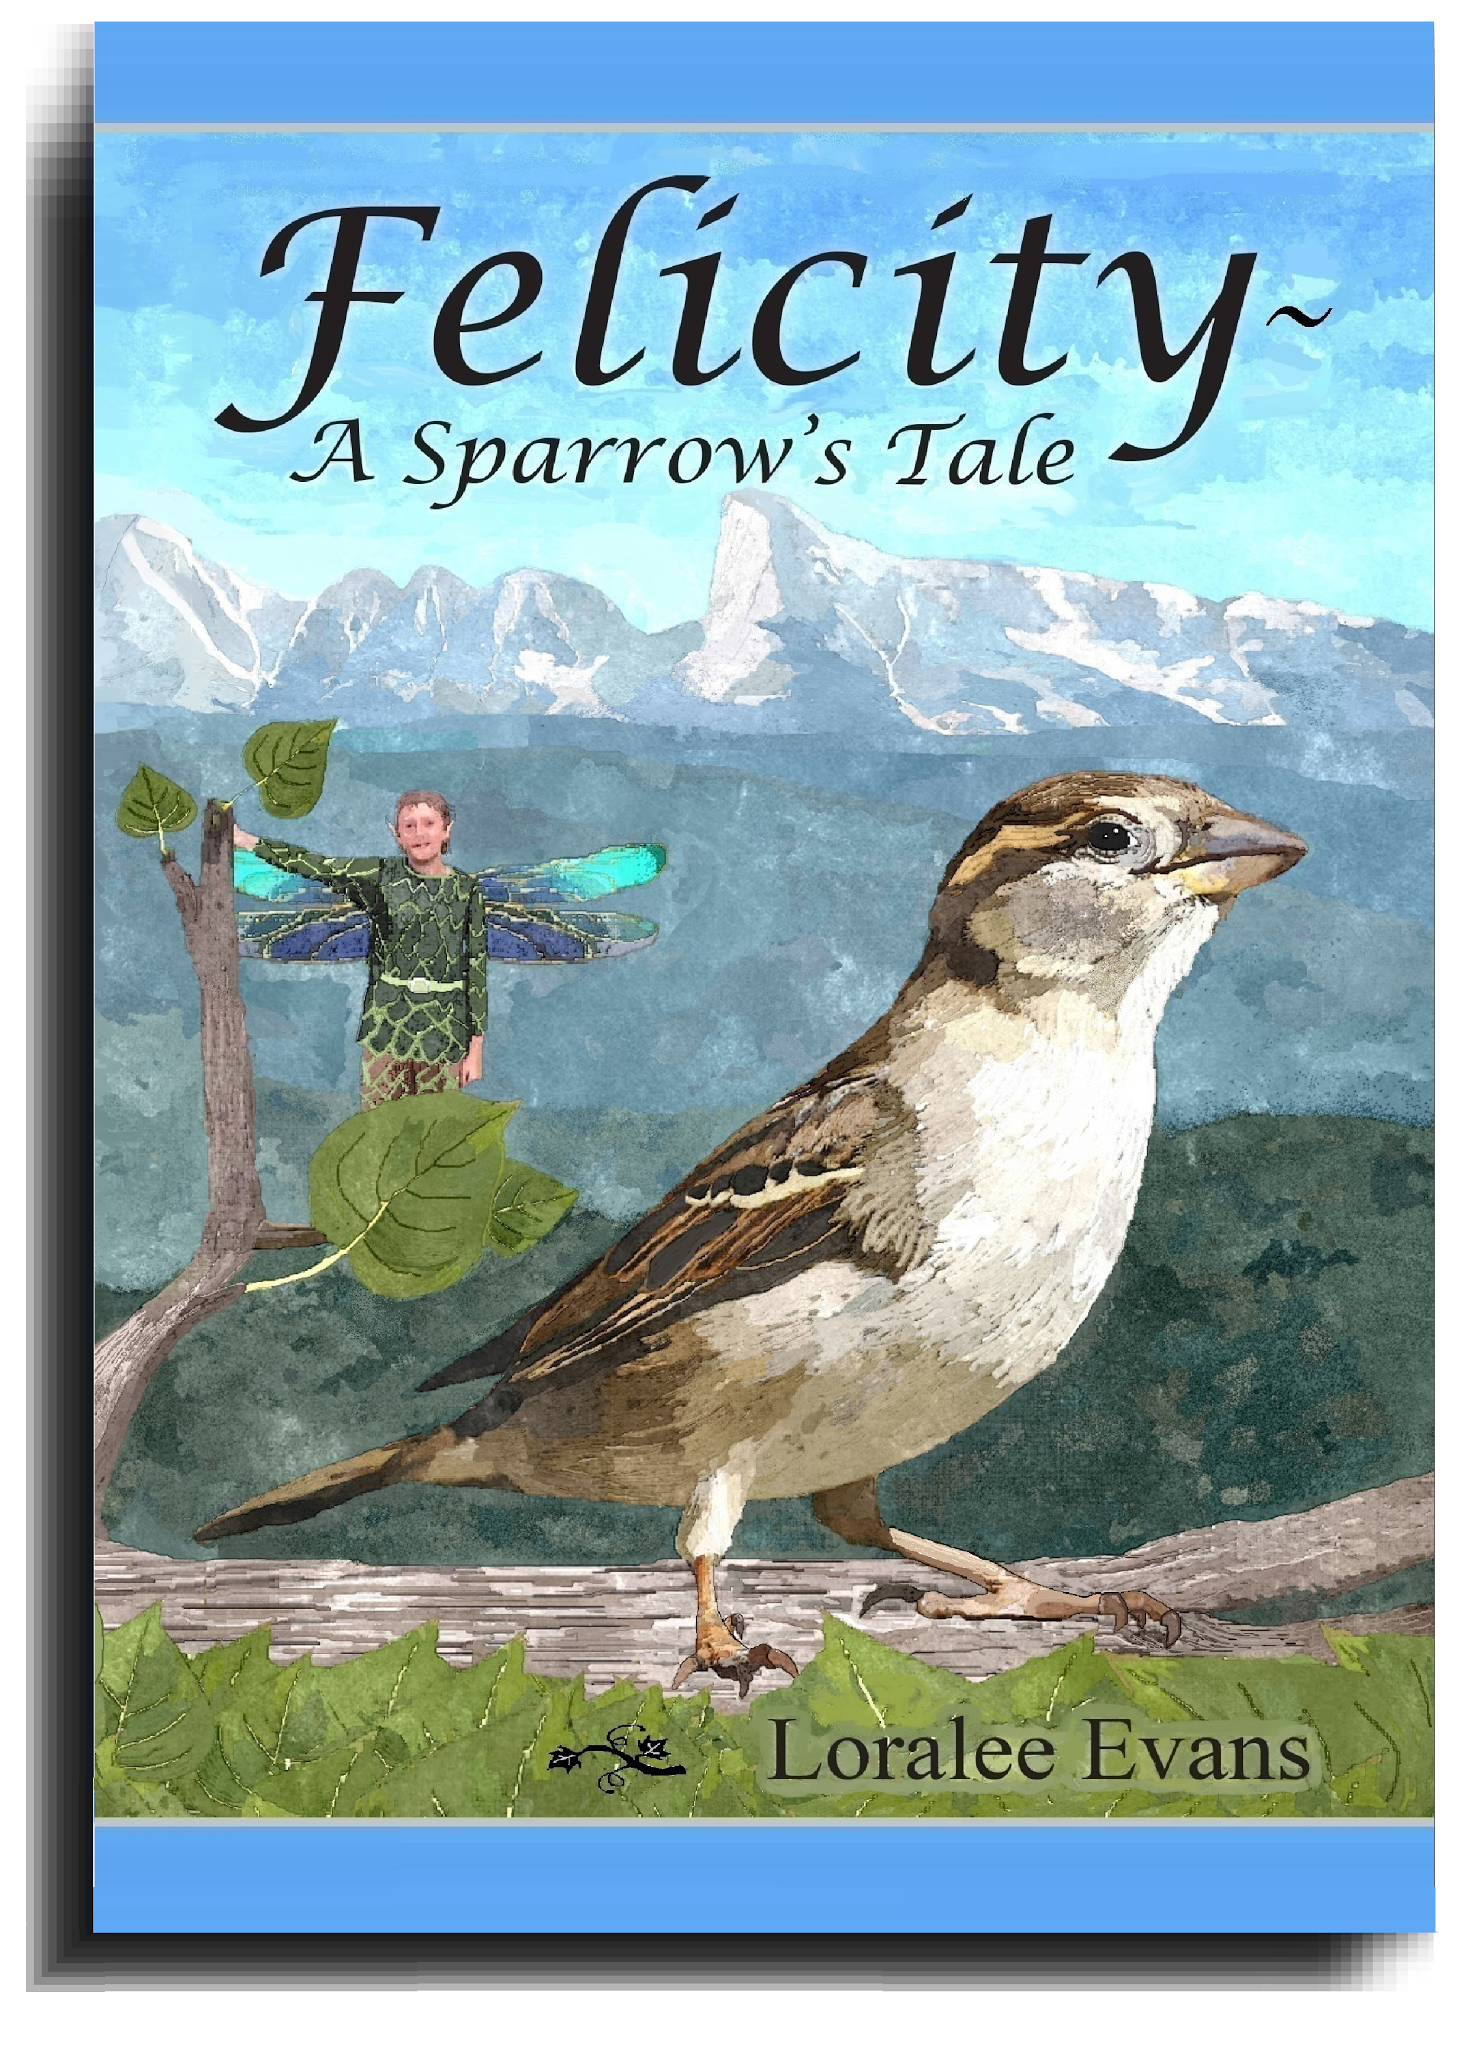 Felicity ~ A Sparrow's Tale by Loralee Evans